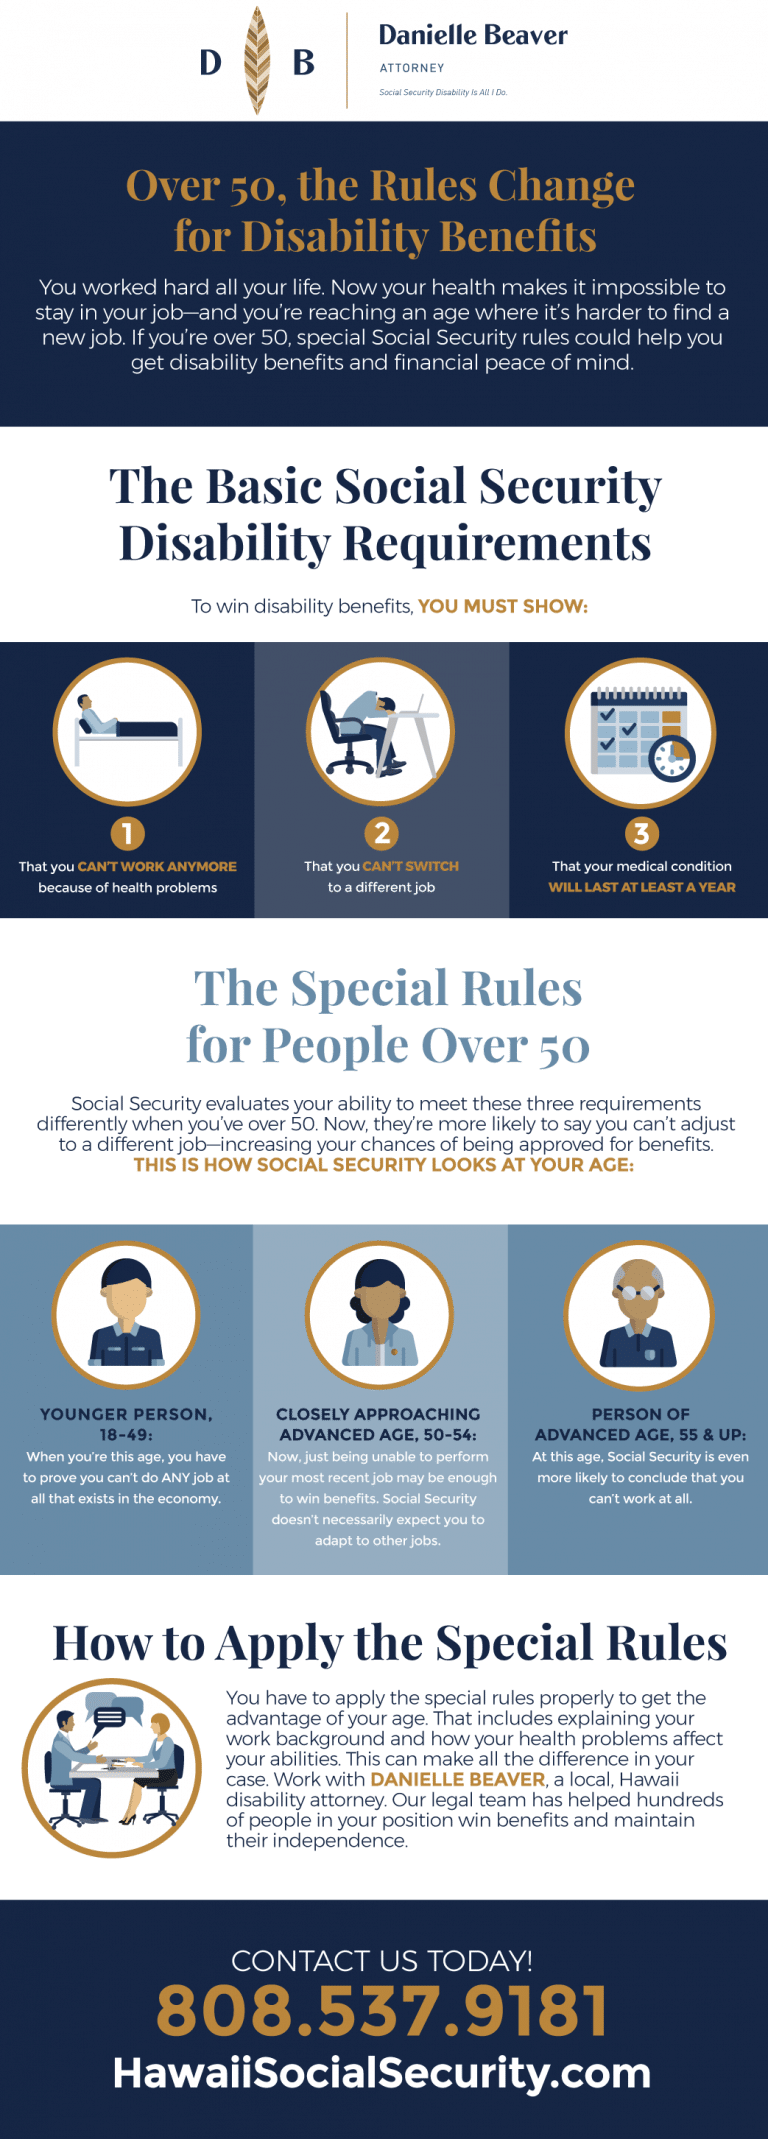 over 50 the rules change for disability benefits infographic